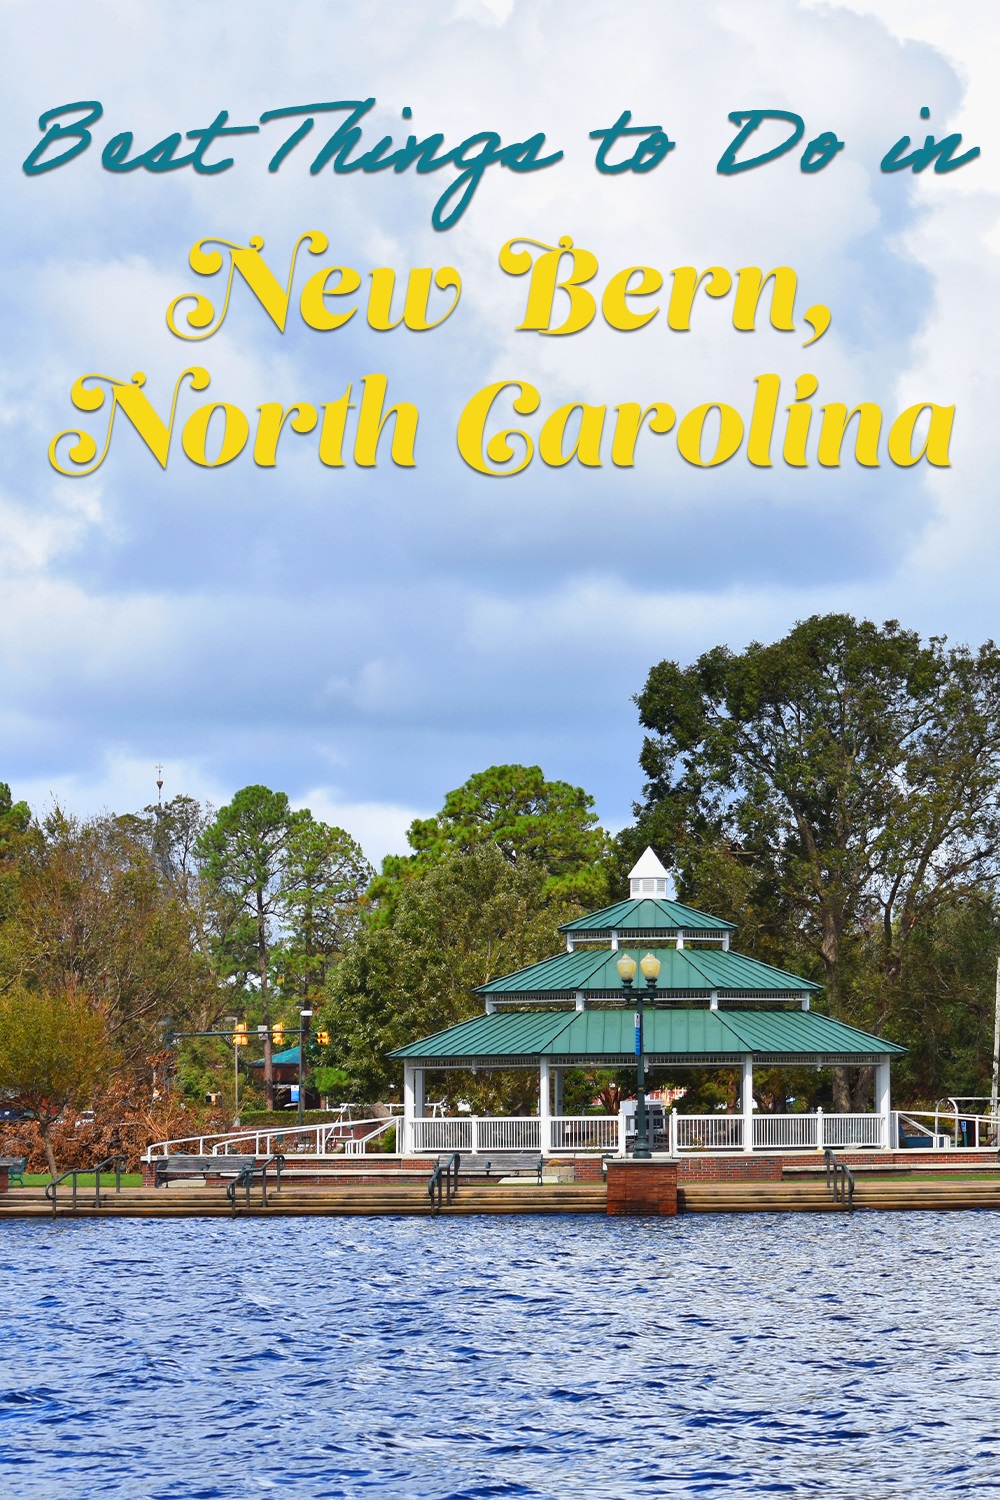 Best Things to Do in New Bern, North Carolina